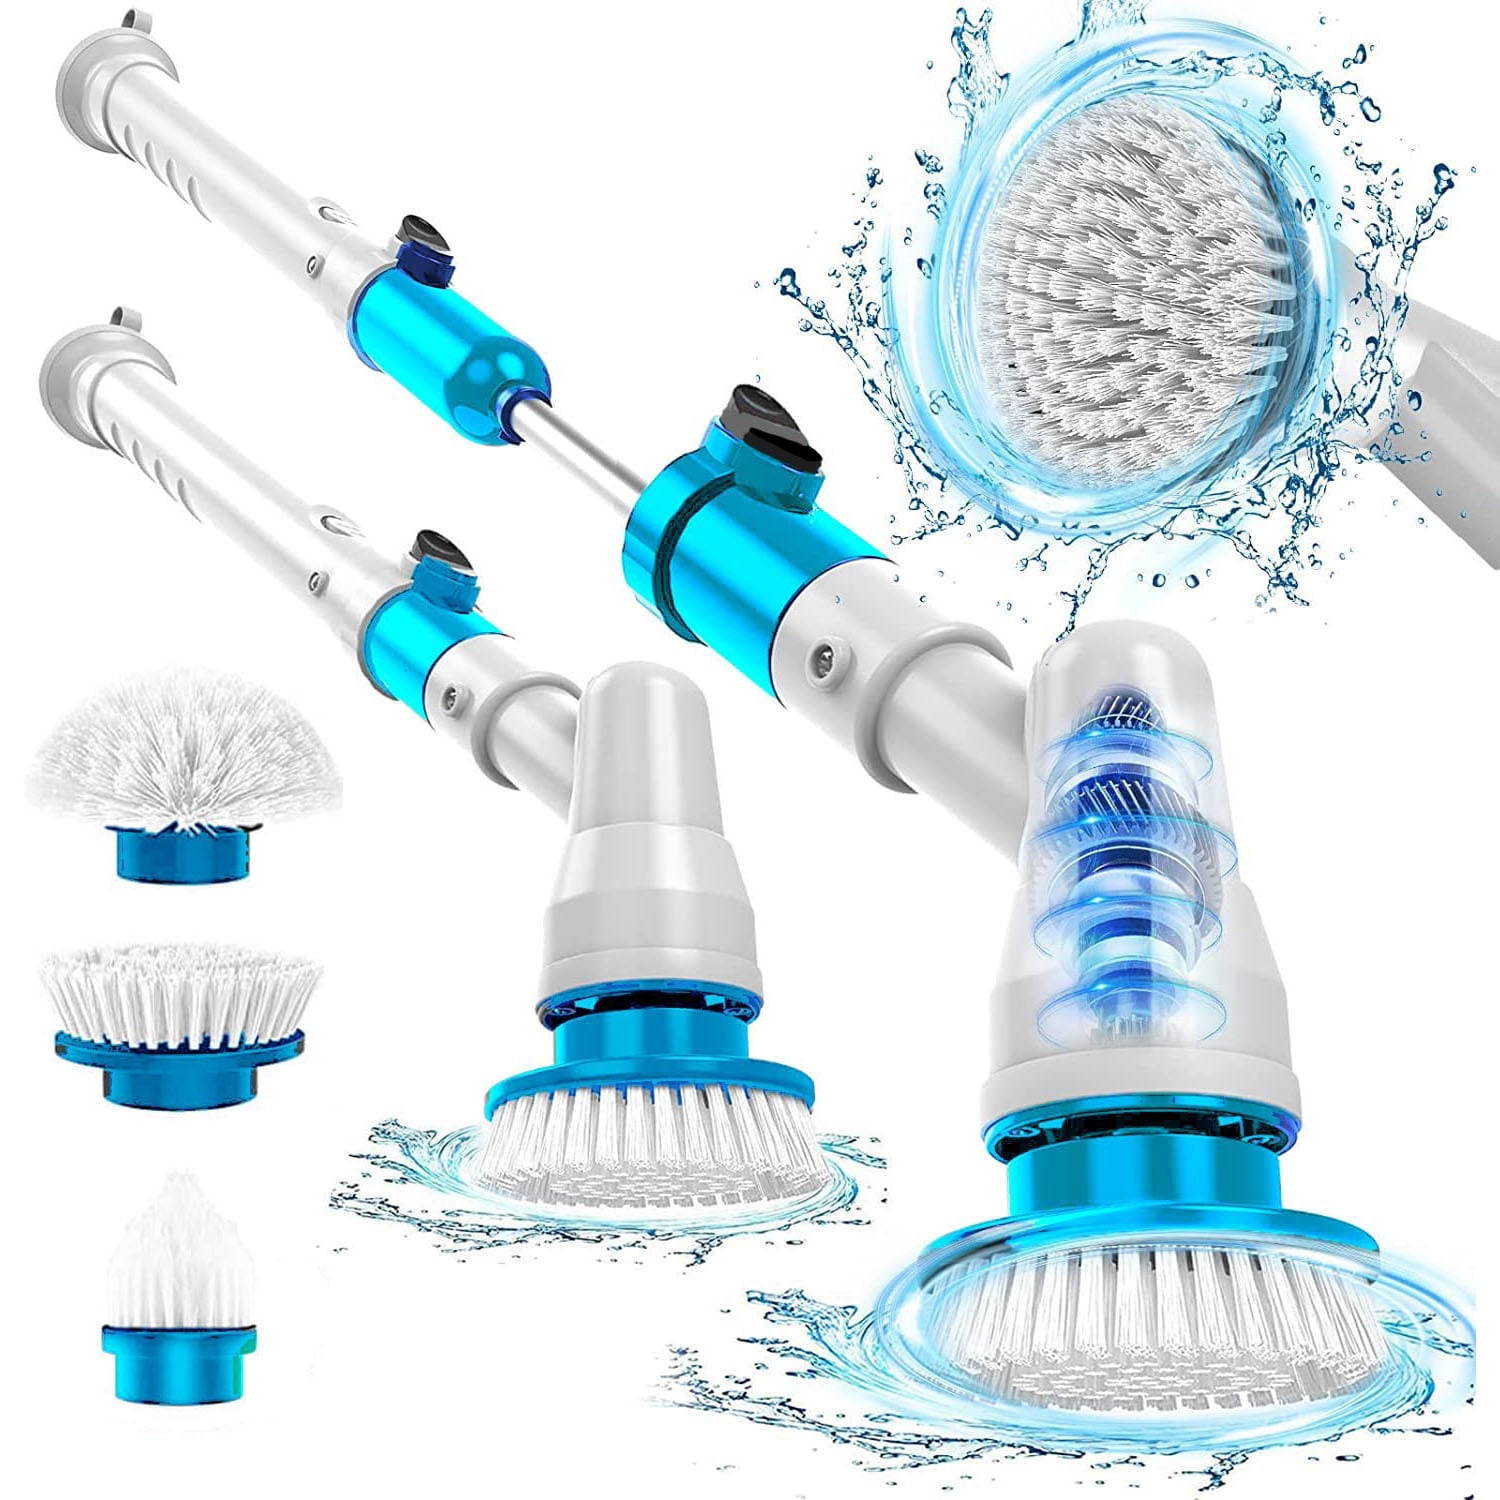 Electric Spin Scrubber 360 Cordless Bathroom Cleaning Brush with 4  Replaceable Scrubber Brush Heads Extension Handle for Tub, Tile, Wall,  Bathroom